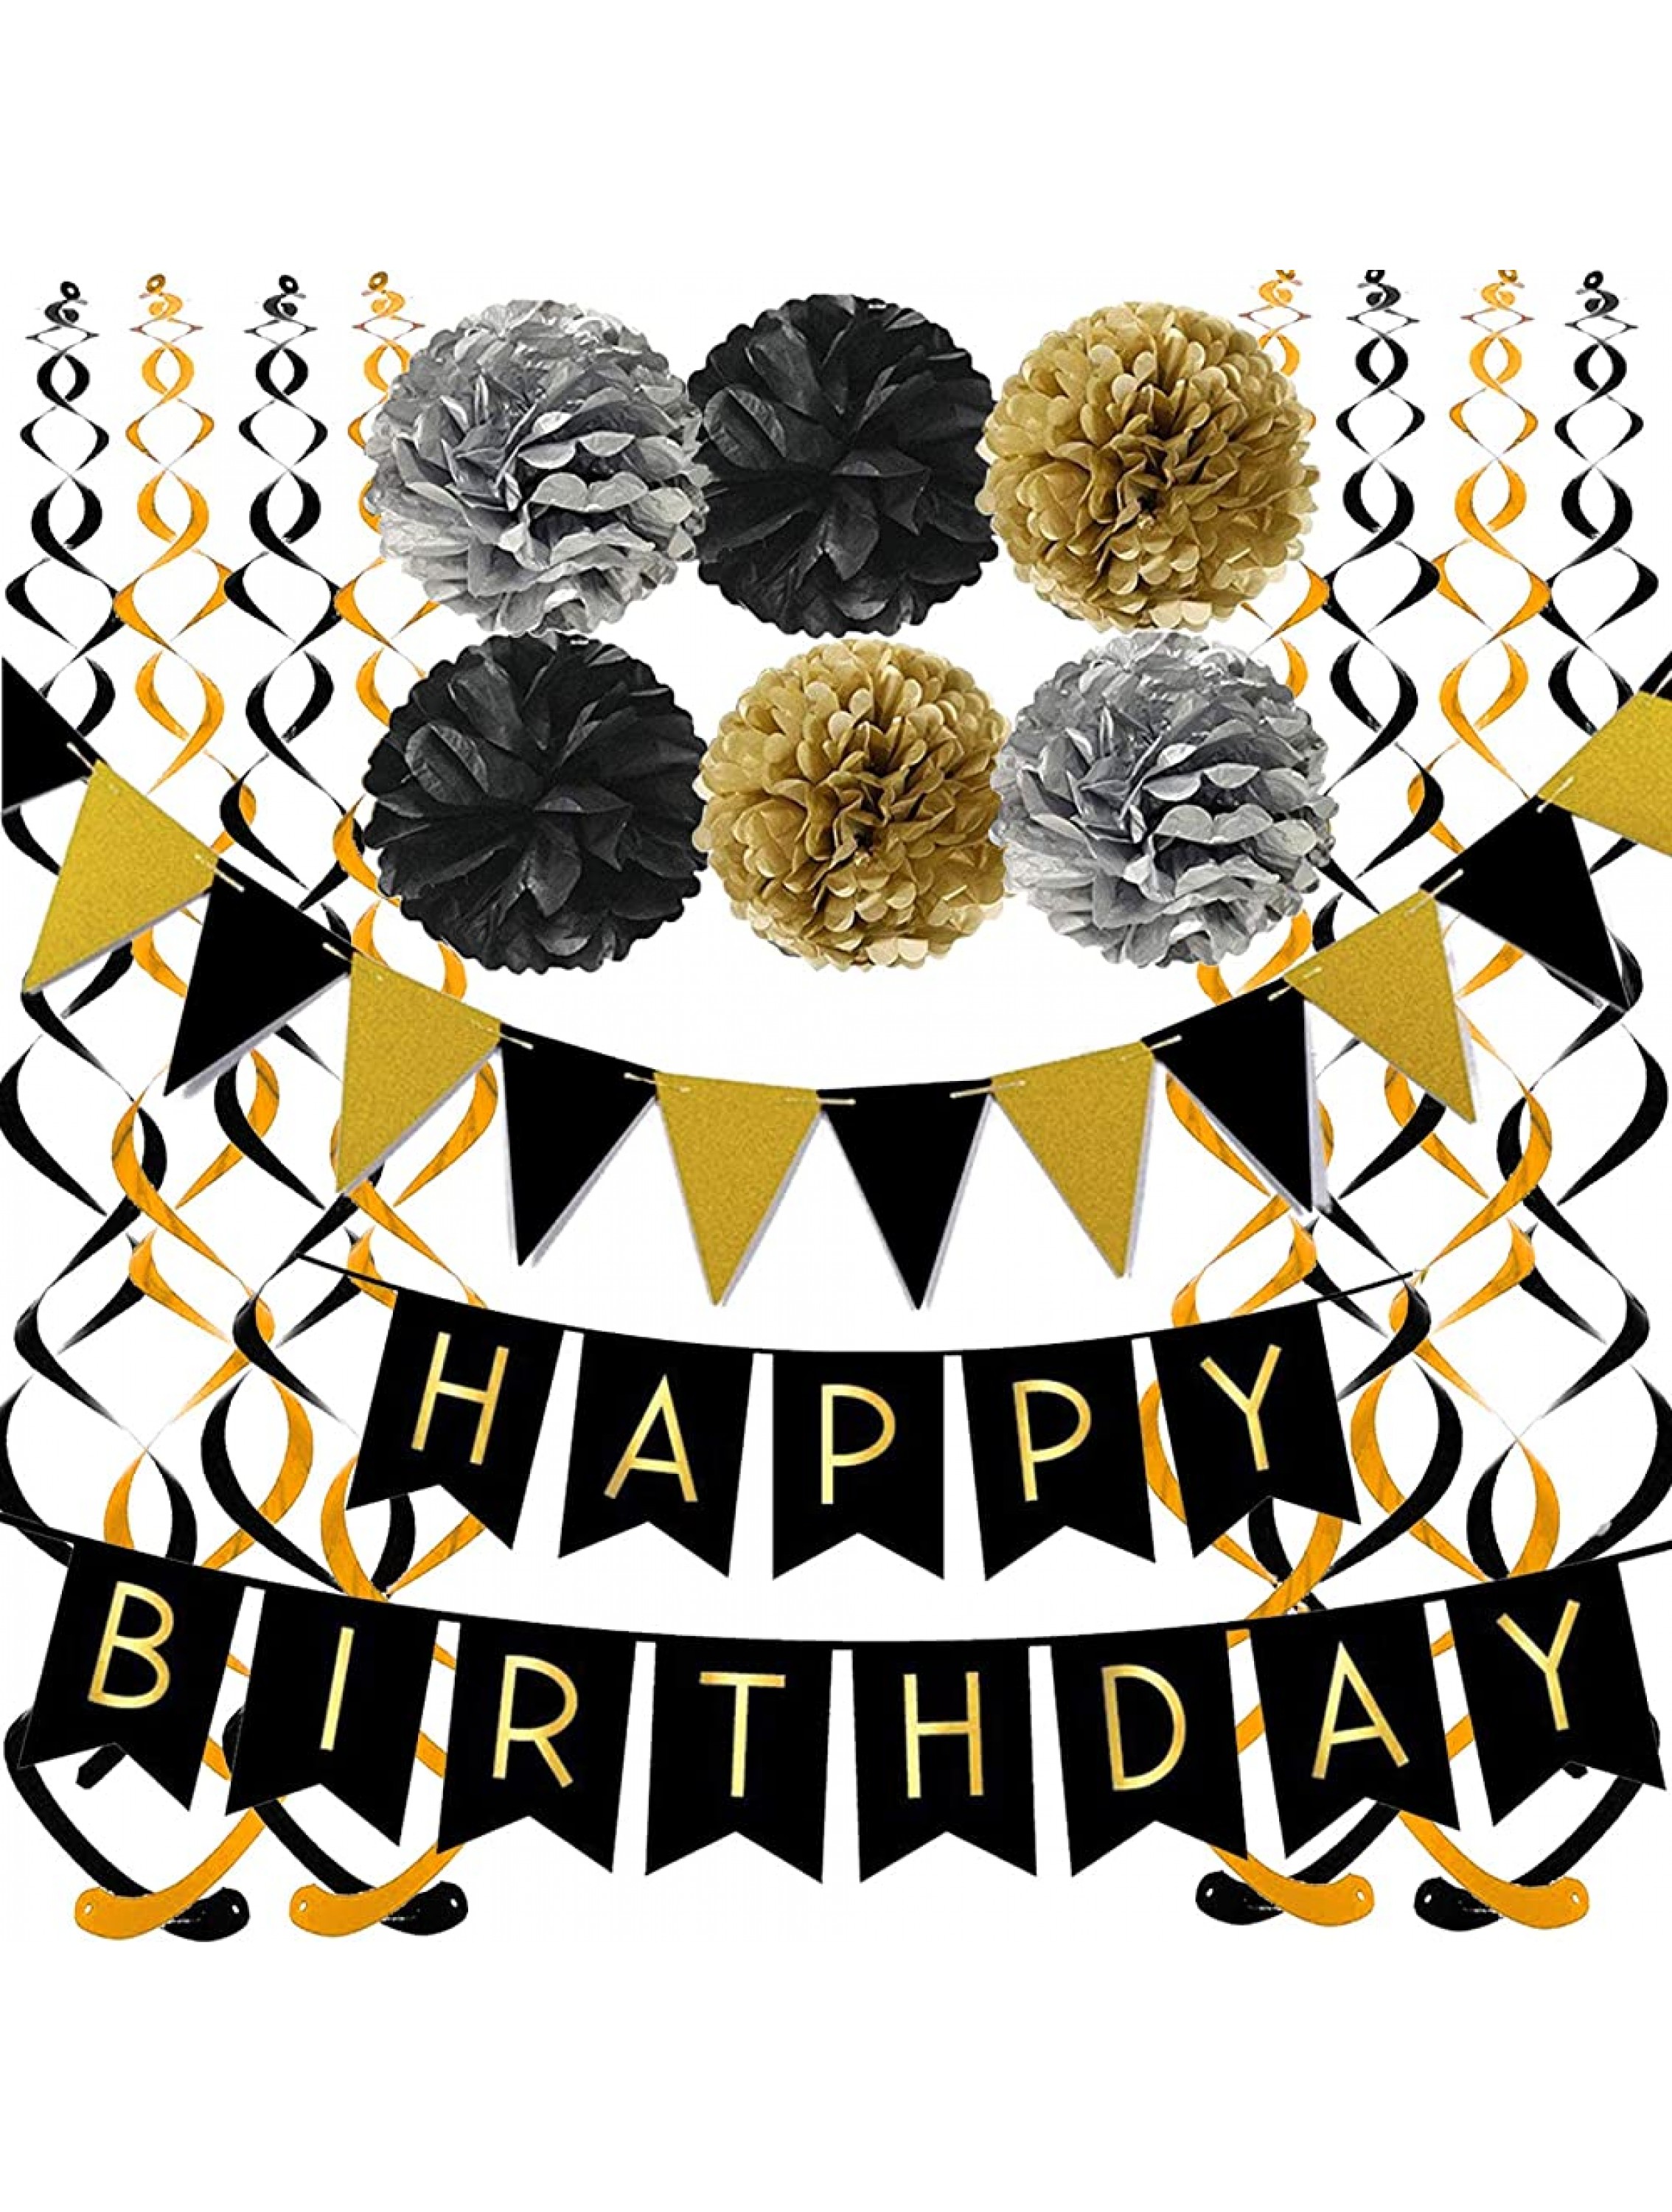 FECEDY Black Happy Birthday Banner with Black Gold Paper Flag Bunting Paper Swirl Streamers Pom Poms for Birthday Party Decorations - BE0HH3IGQ